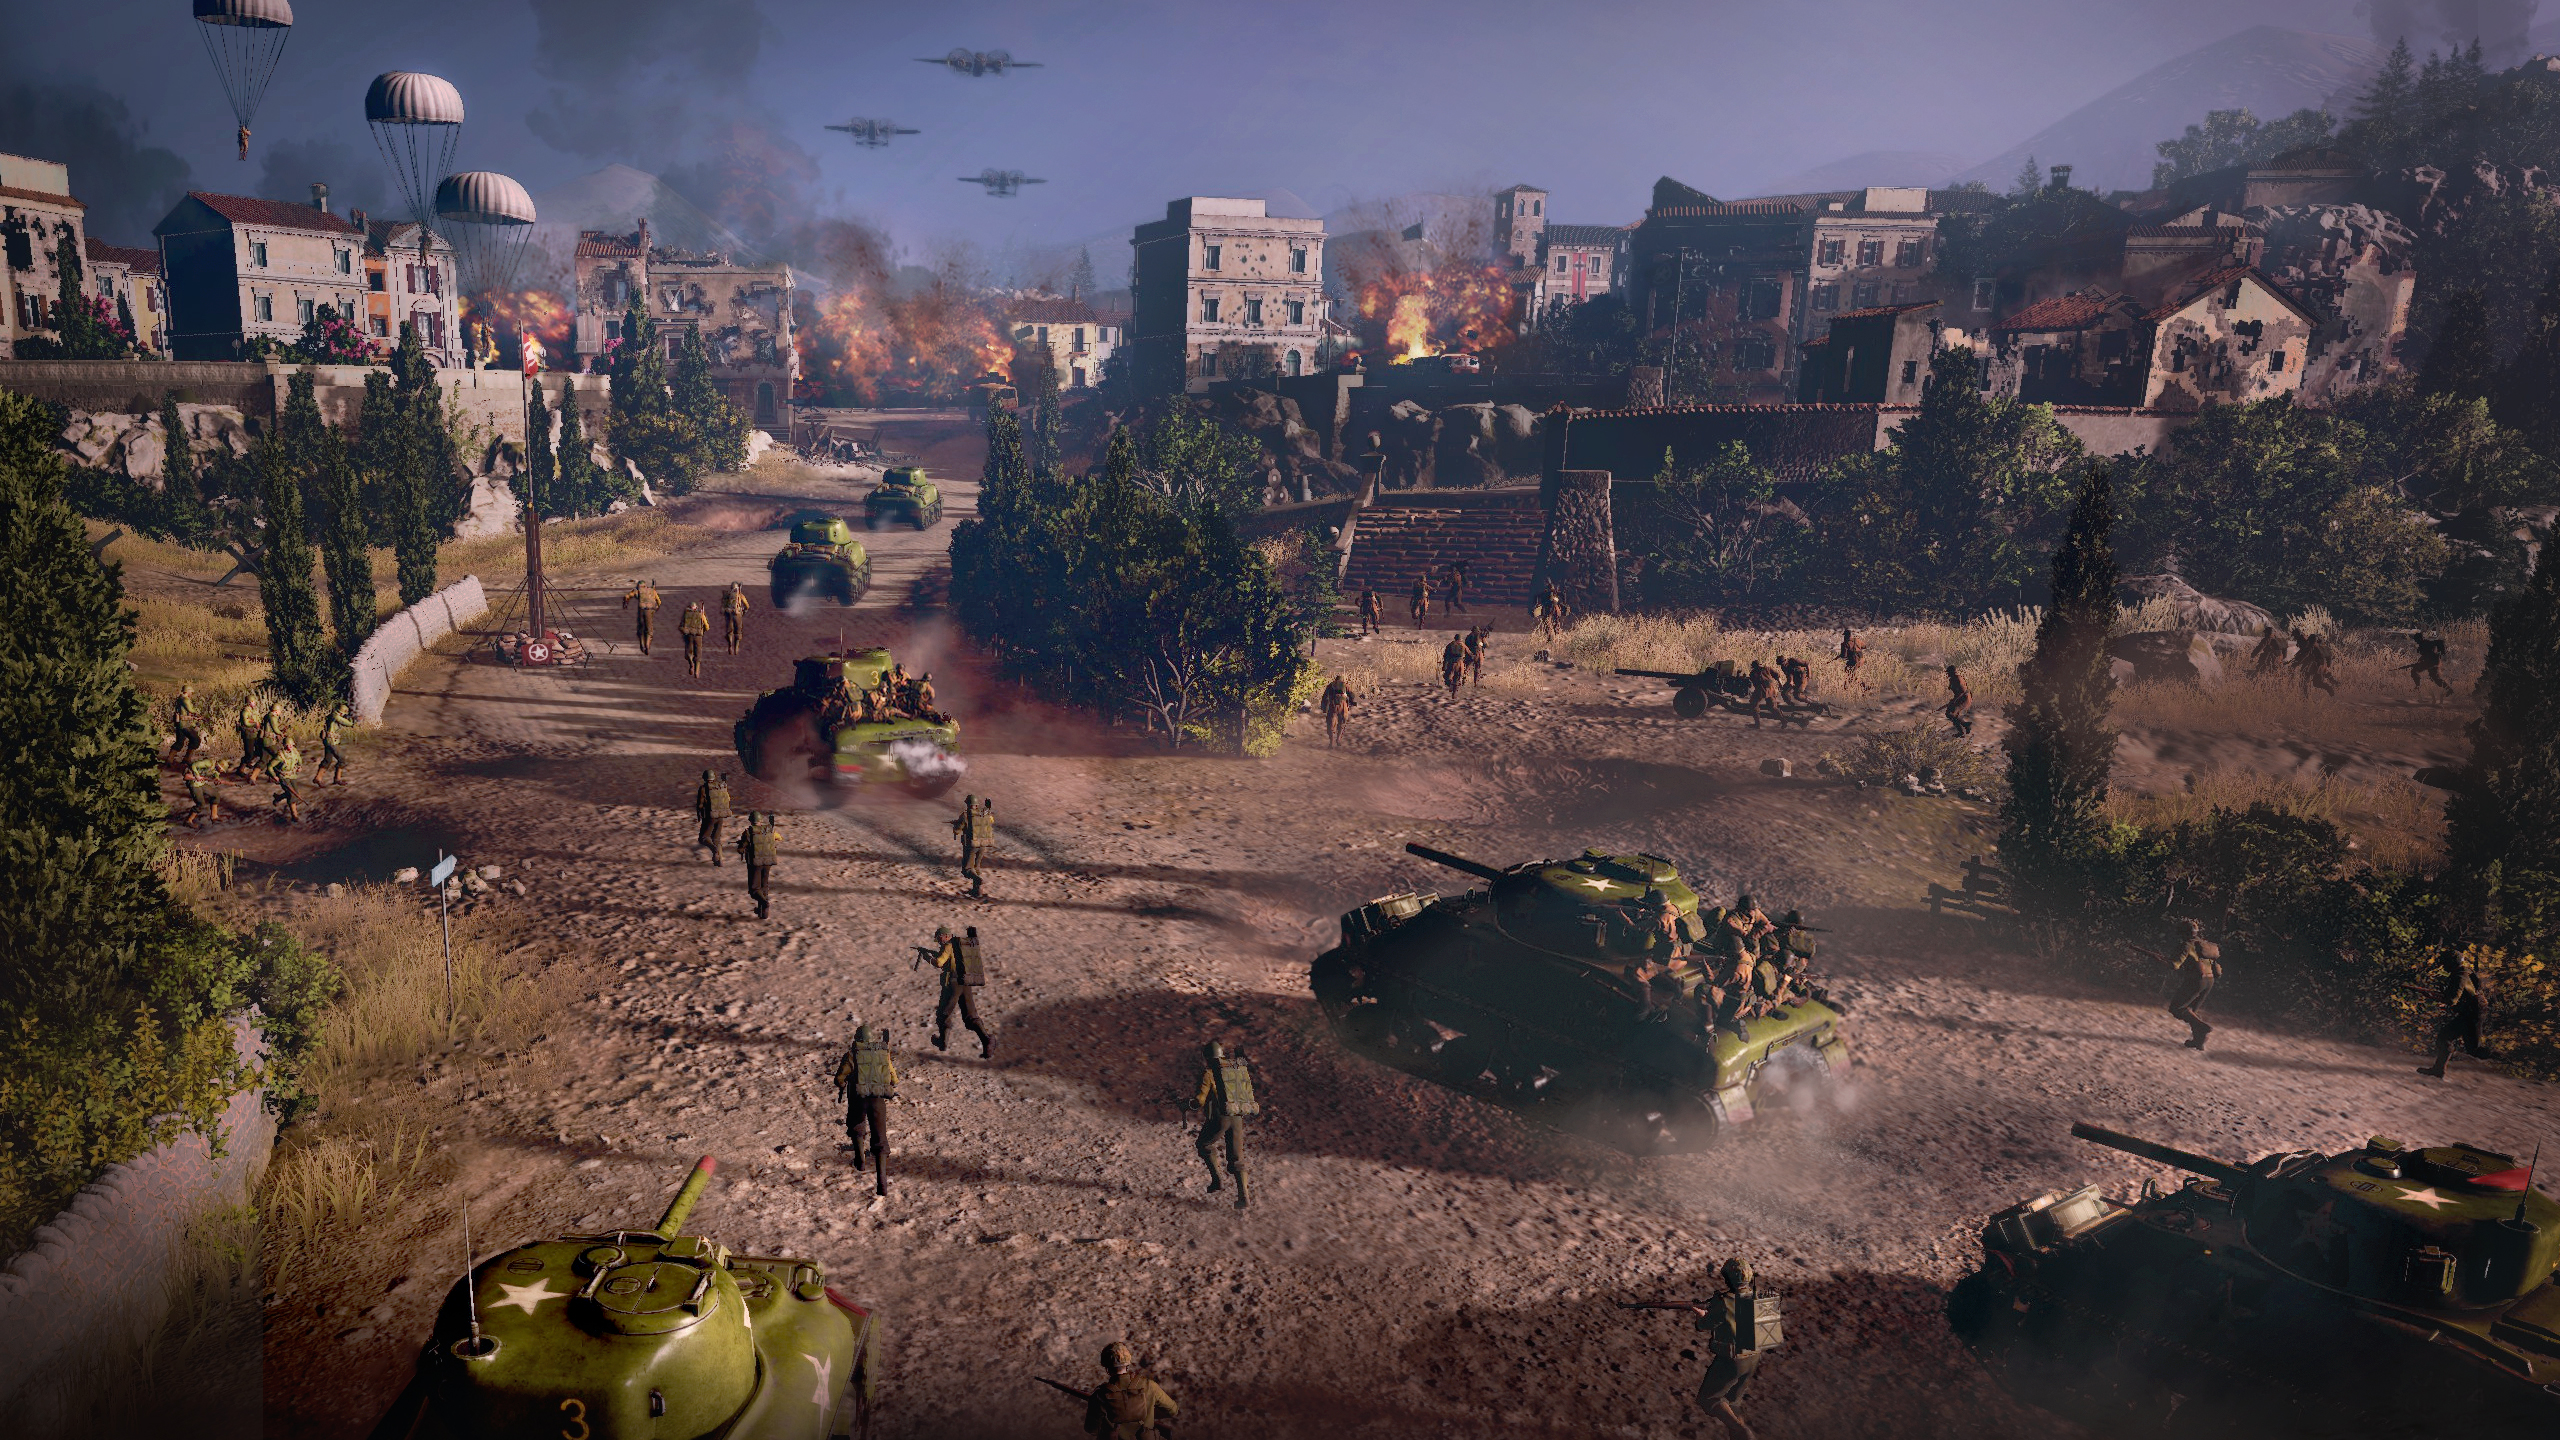  Company of Heroes 3's multiplayer lets you fight with or against your friends in dramatic, emergent battles 